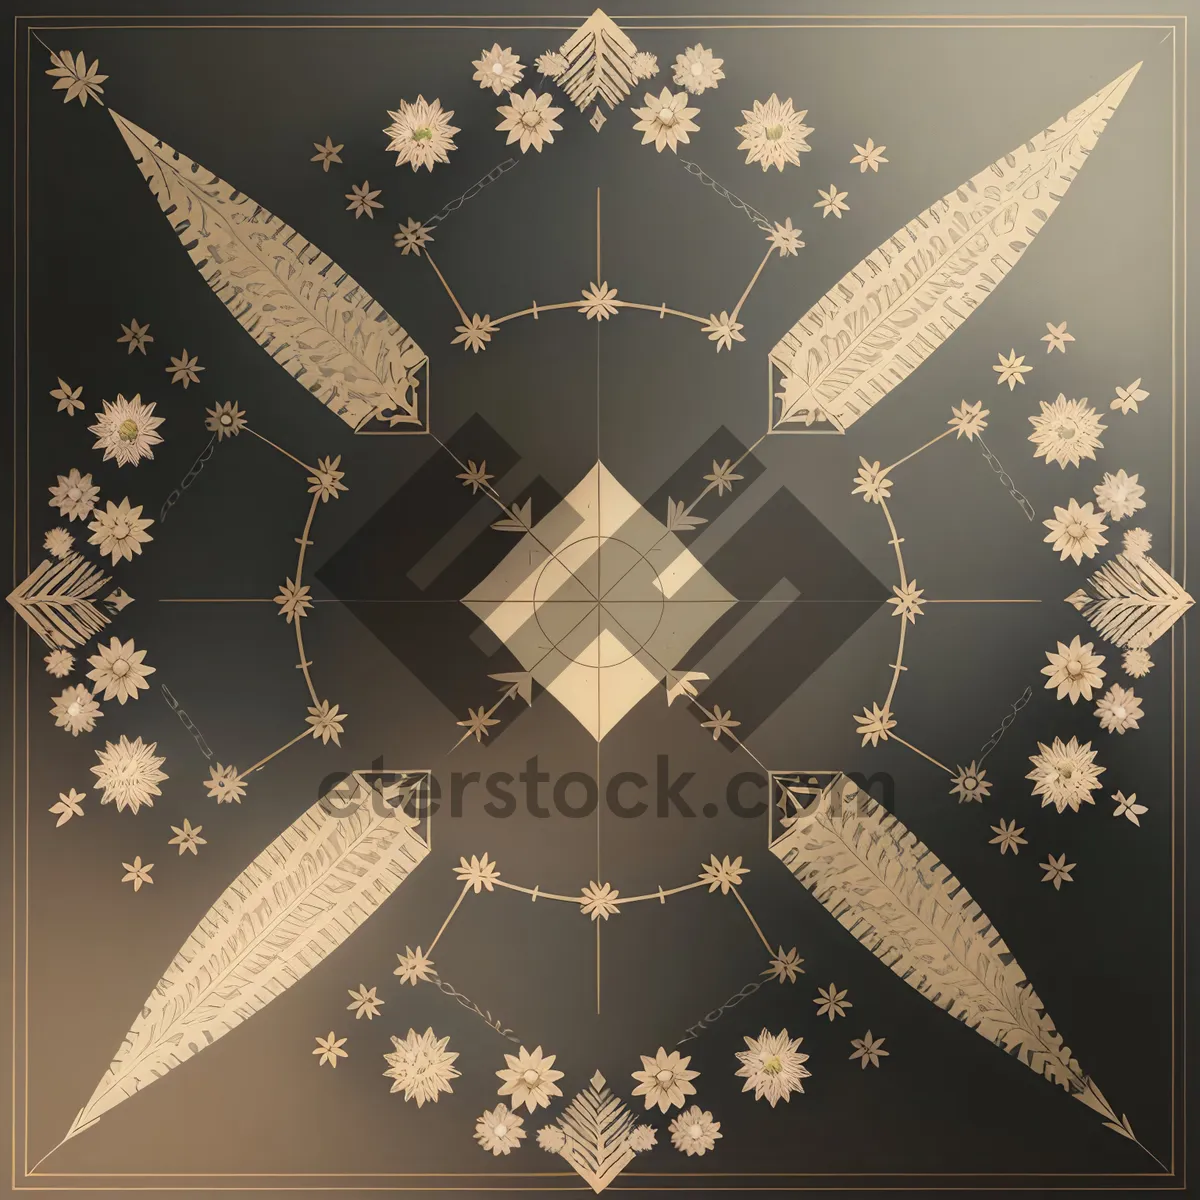 Picture of Frosty winter snowflakes in elegant symmetry